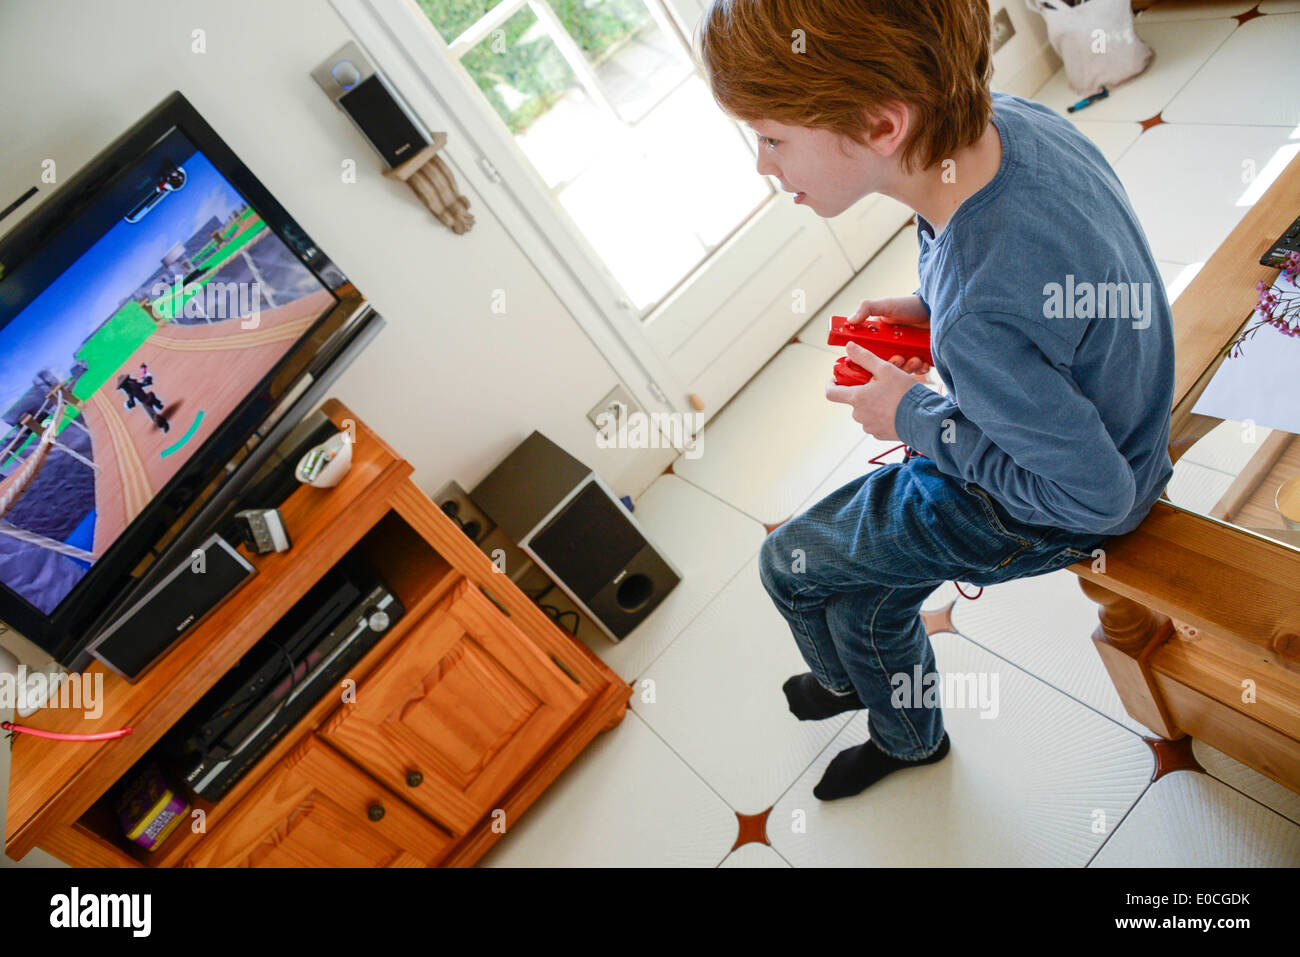 Child playing with video game Stock Photo